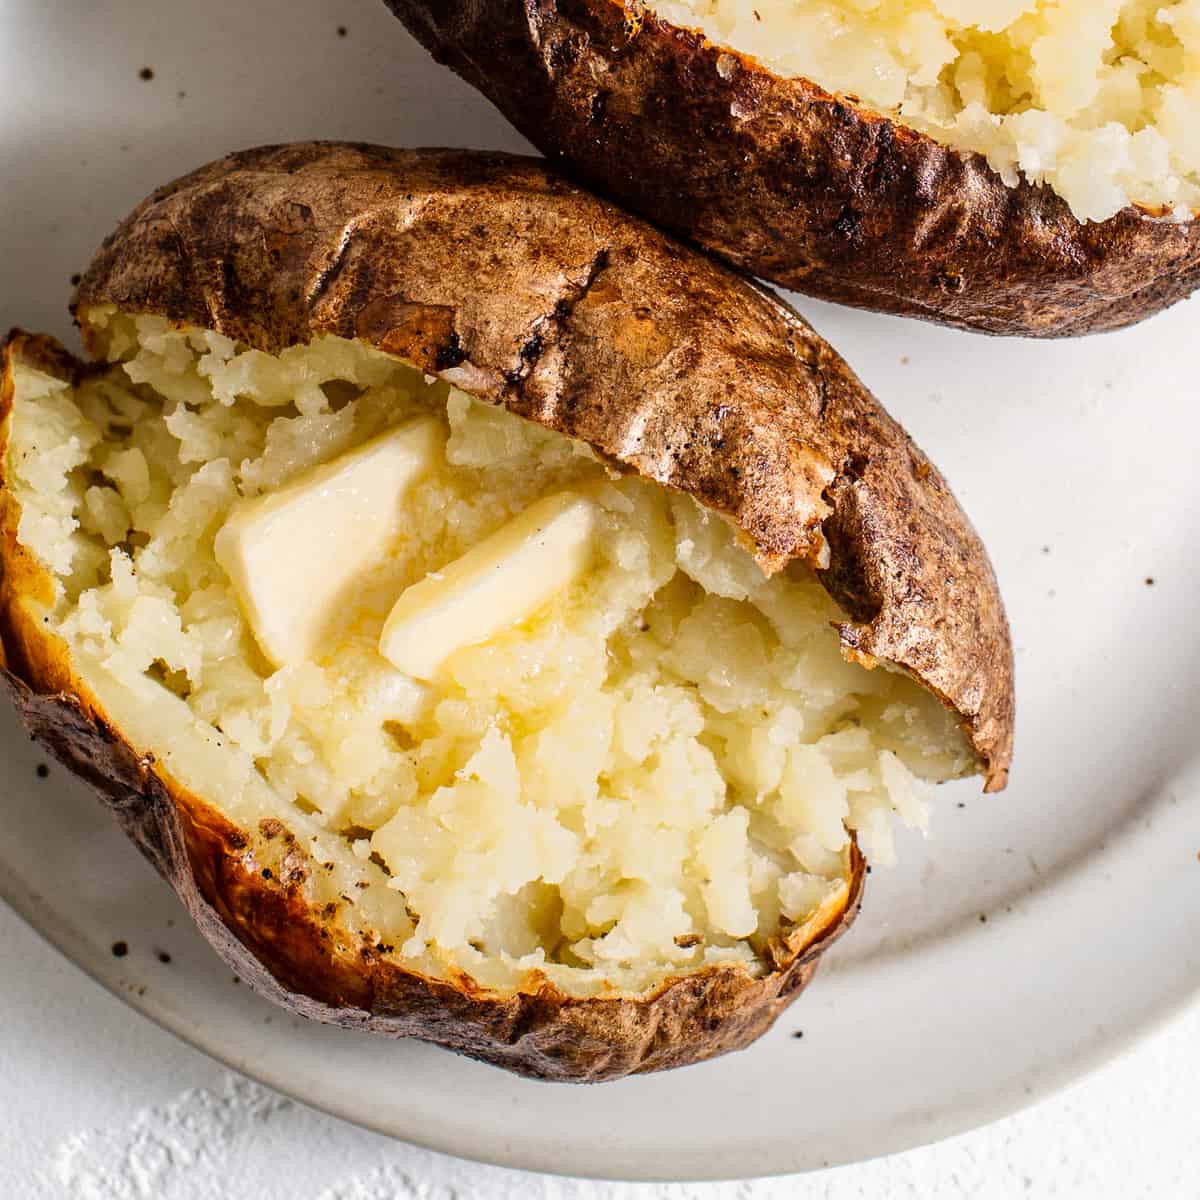 How to cook a jacket potato in air fryer in 3 easy steps